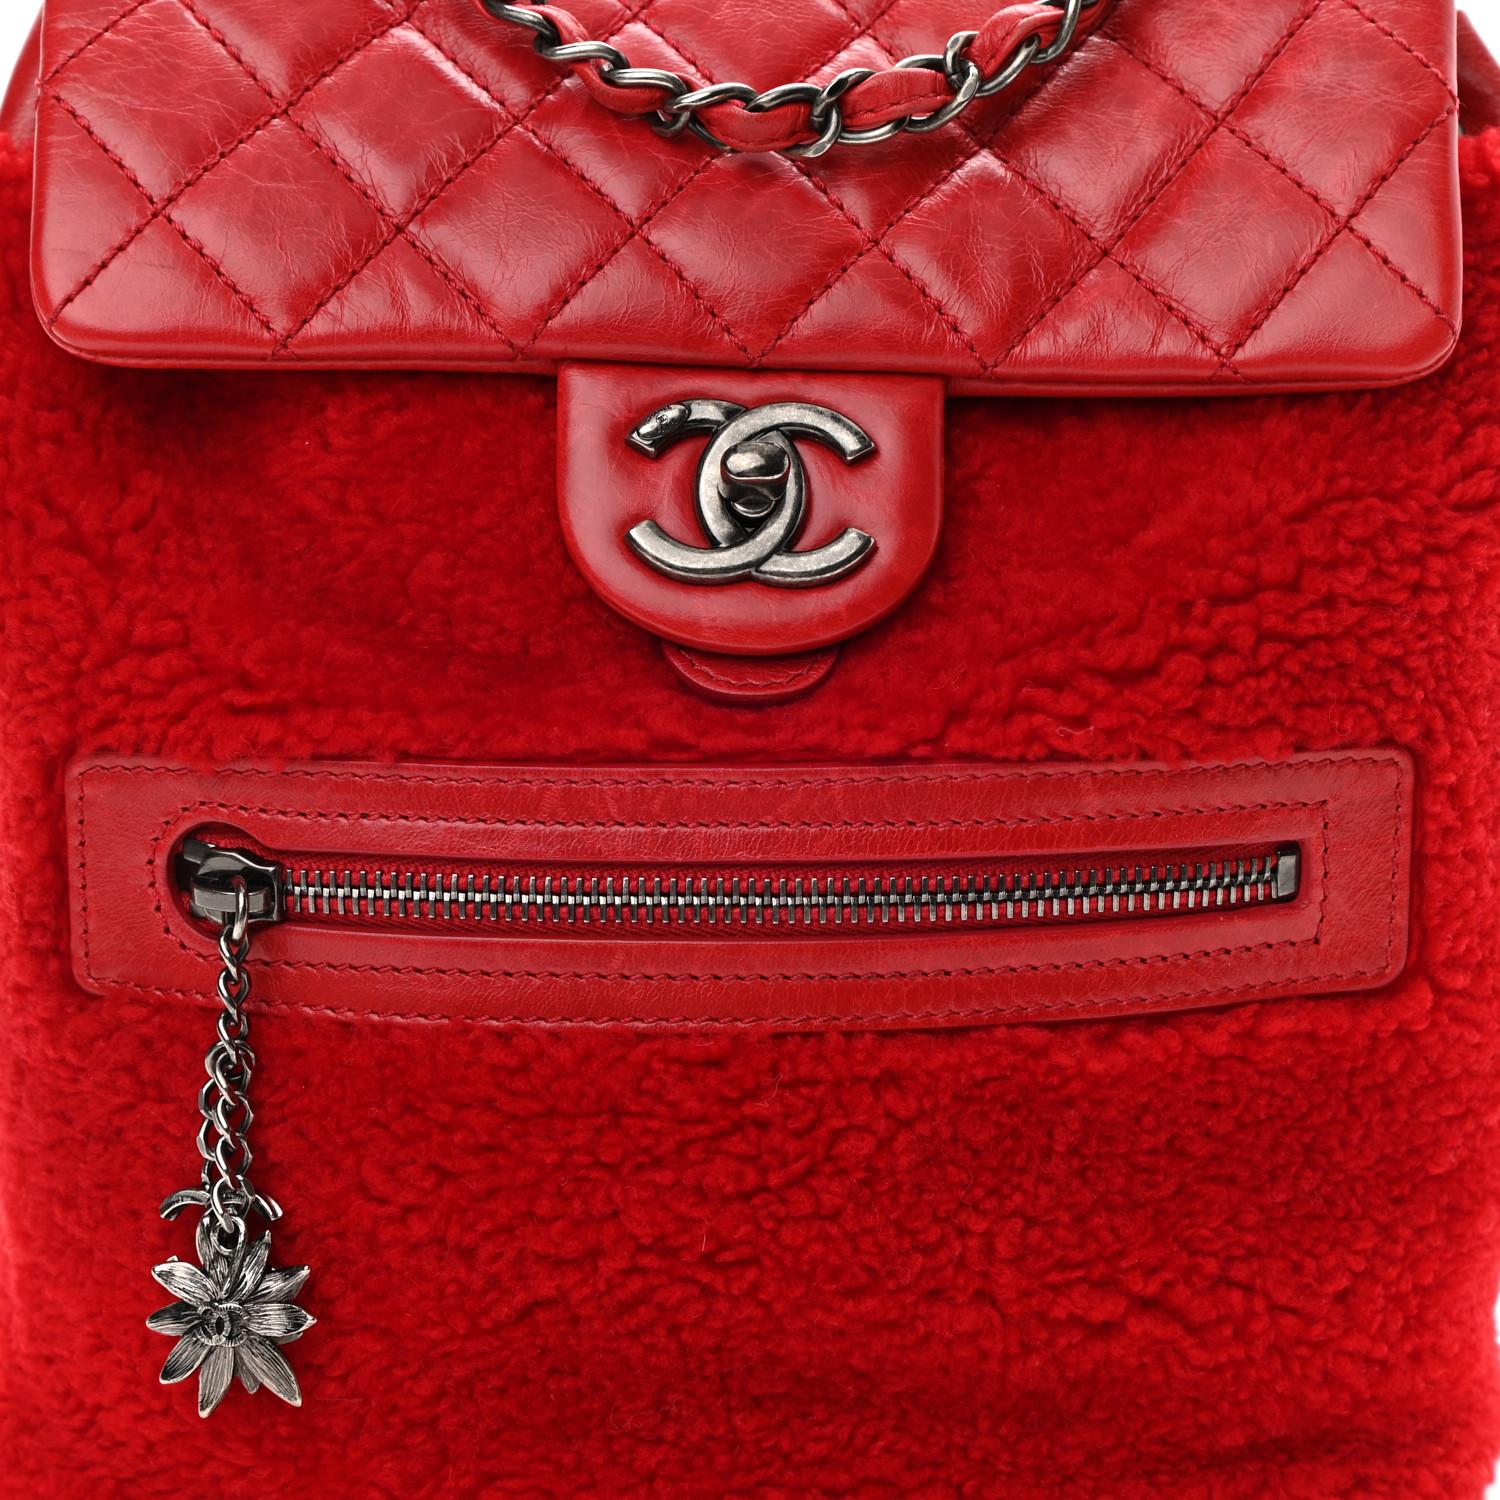 Chanel 2015 Paris-Salzburg Mountain Red Shearling Leather Rucksack Backpack Bag In Good Condition For Sale In Miami, FL